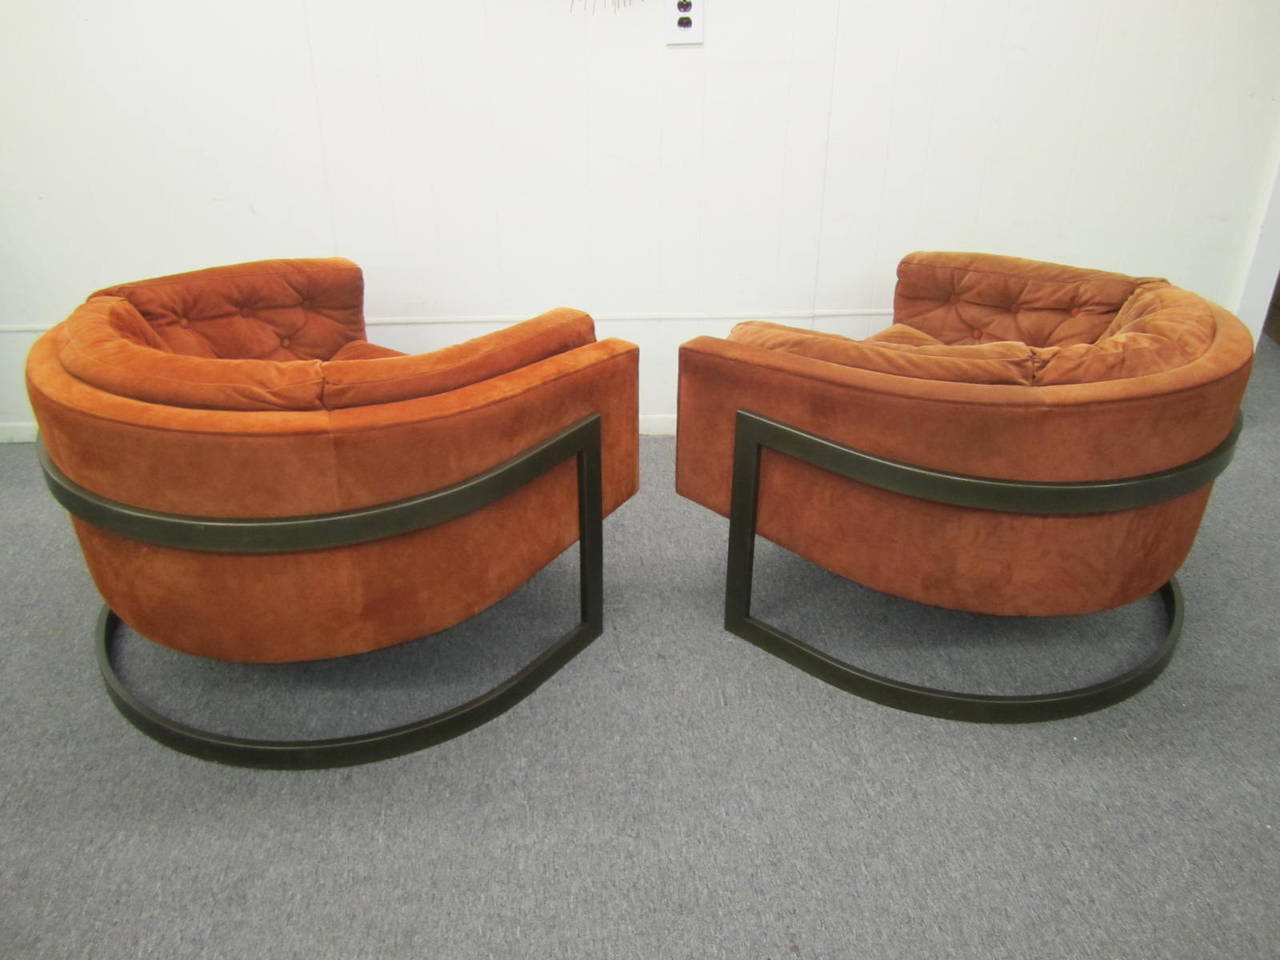 Magnificent pair of Jules Heumann cantilevered bronze frame lounge chair. The chairs retain their original orange suede in nice usable condition, a few small spots. The bronze frames have a fantastic time worn patina-but could be polished for a more